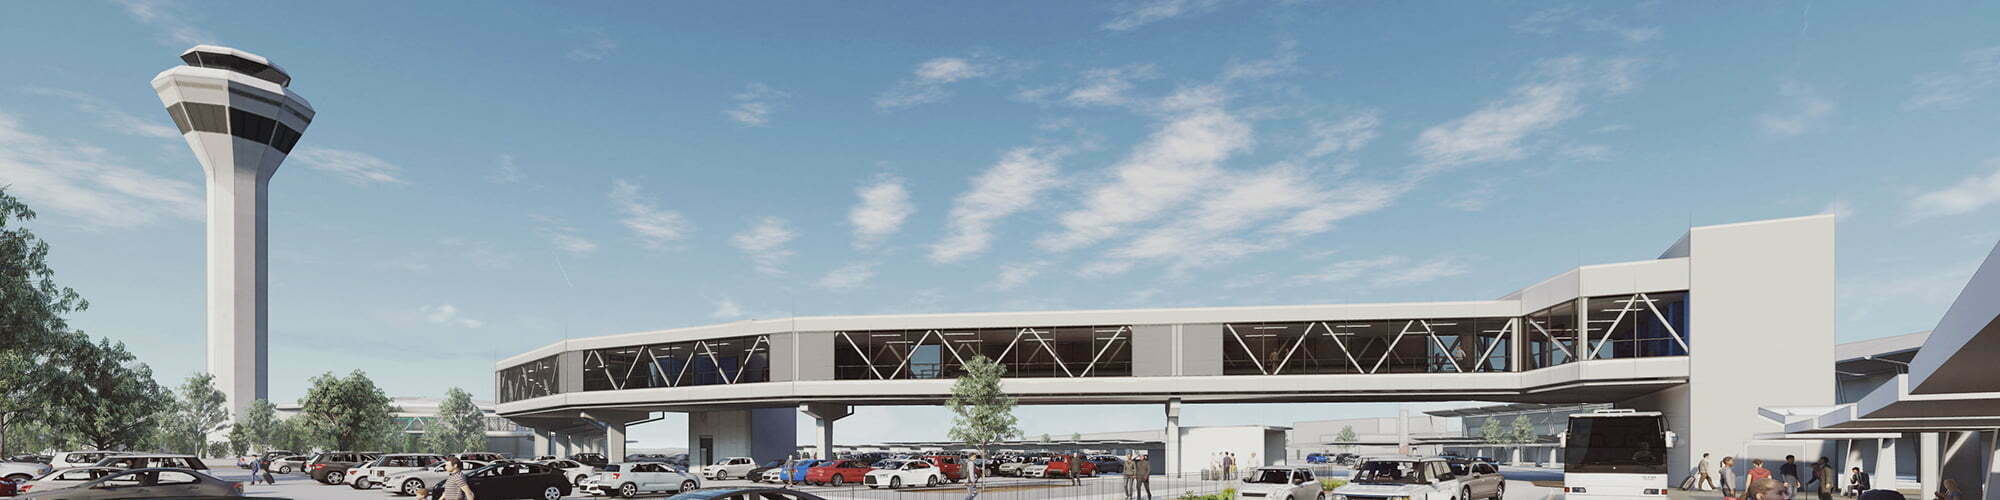 Image for GEORGIOU SECURES NEW AIRPORT SKYBRIDGE